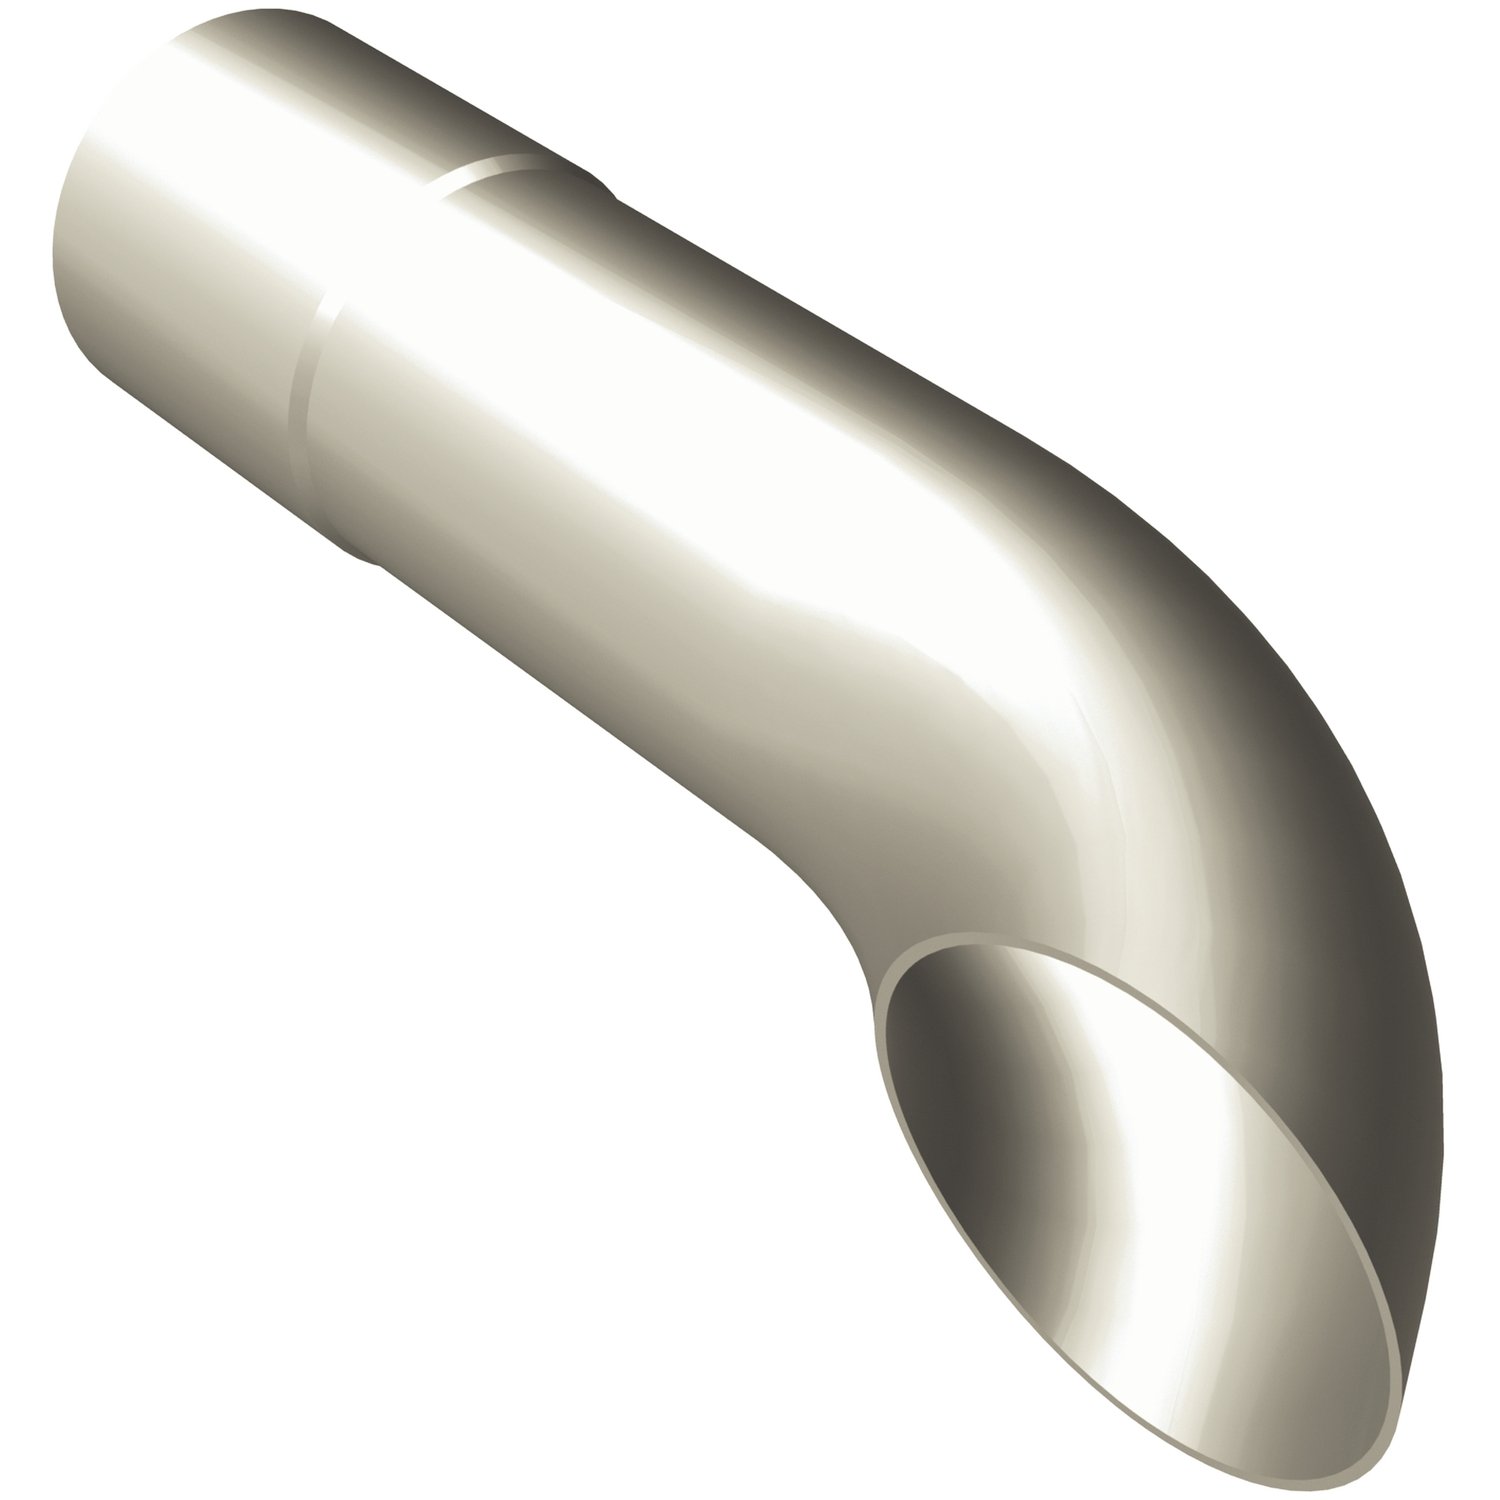 Polished Stainless Steel Weld-On Single Exhaust Tip Inlet Inside Diameter: 3"